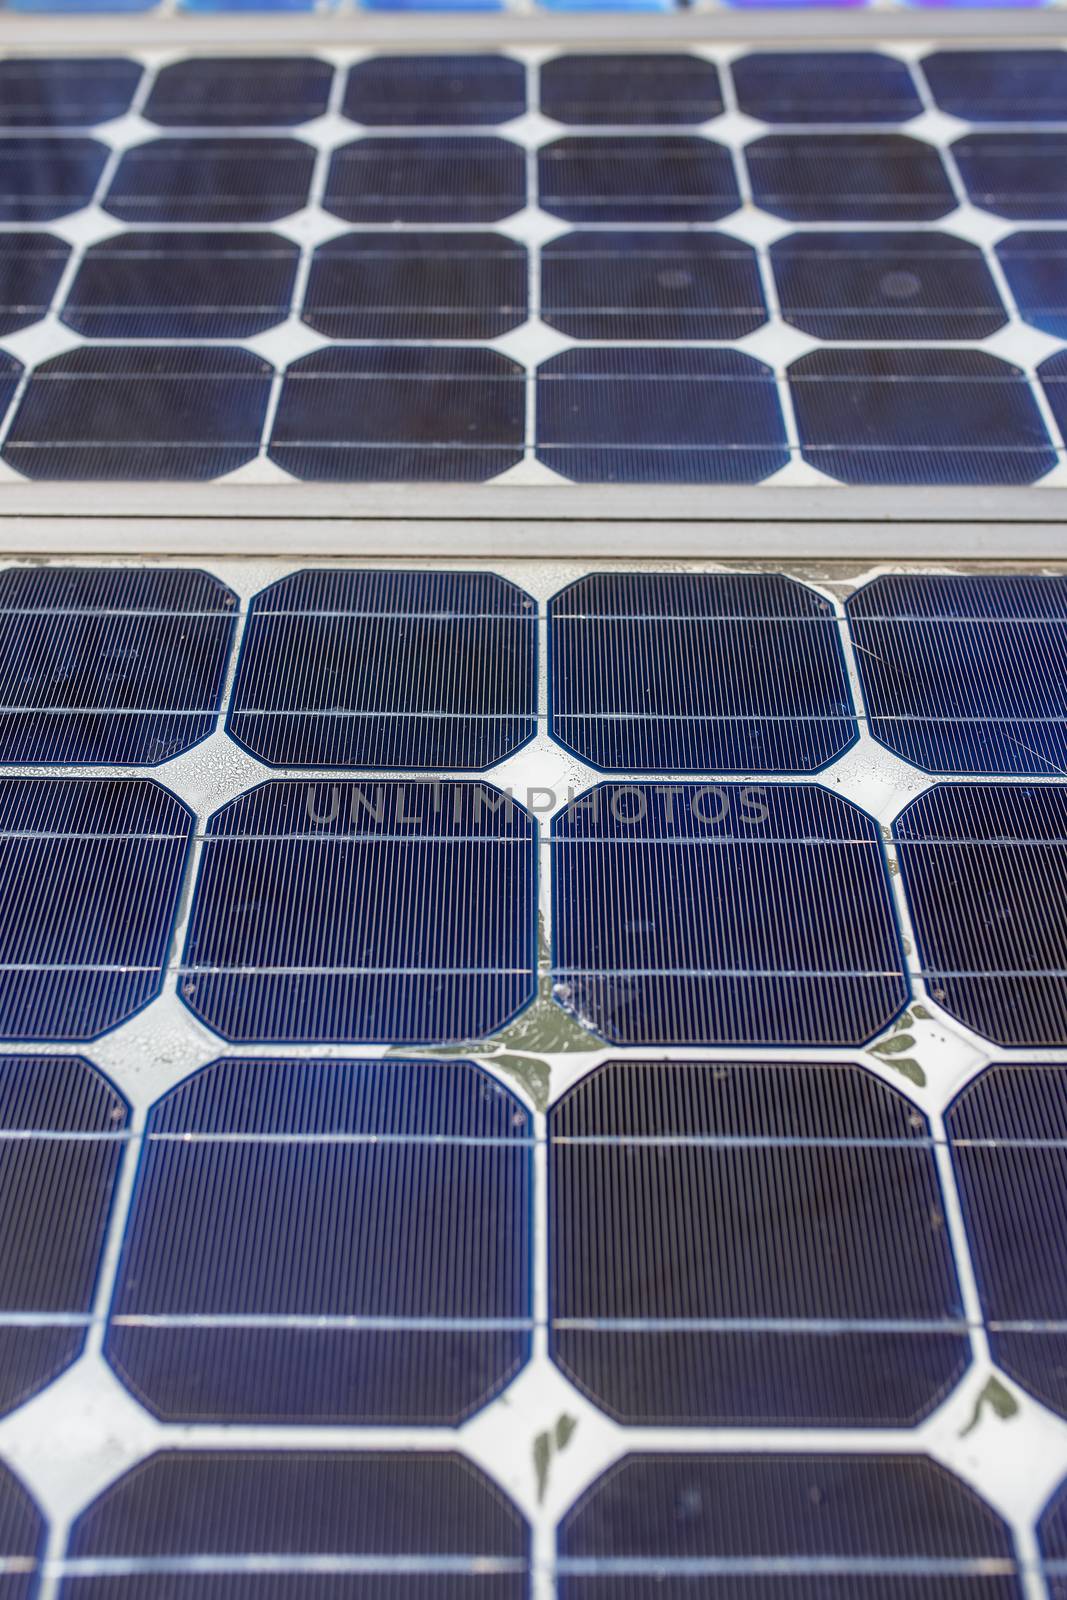 Old small solar panels gate house opening photovoltaic electric system for home in village.